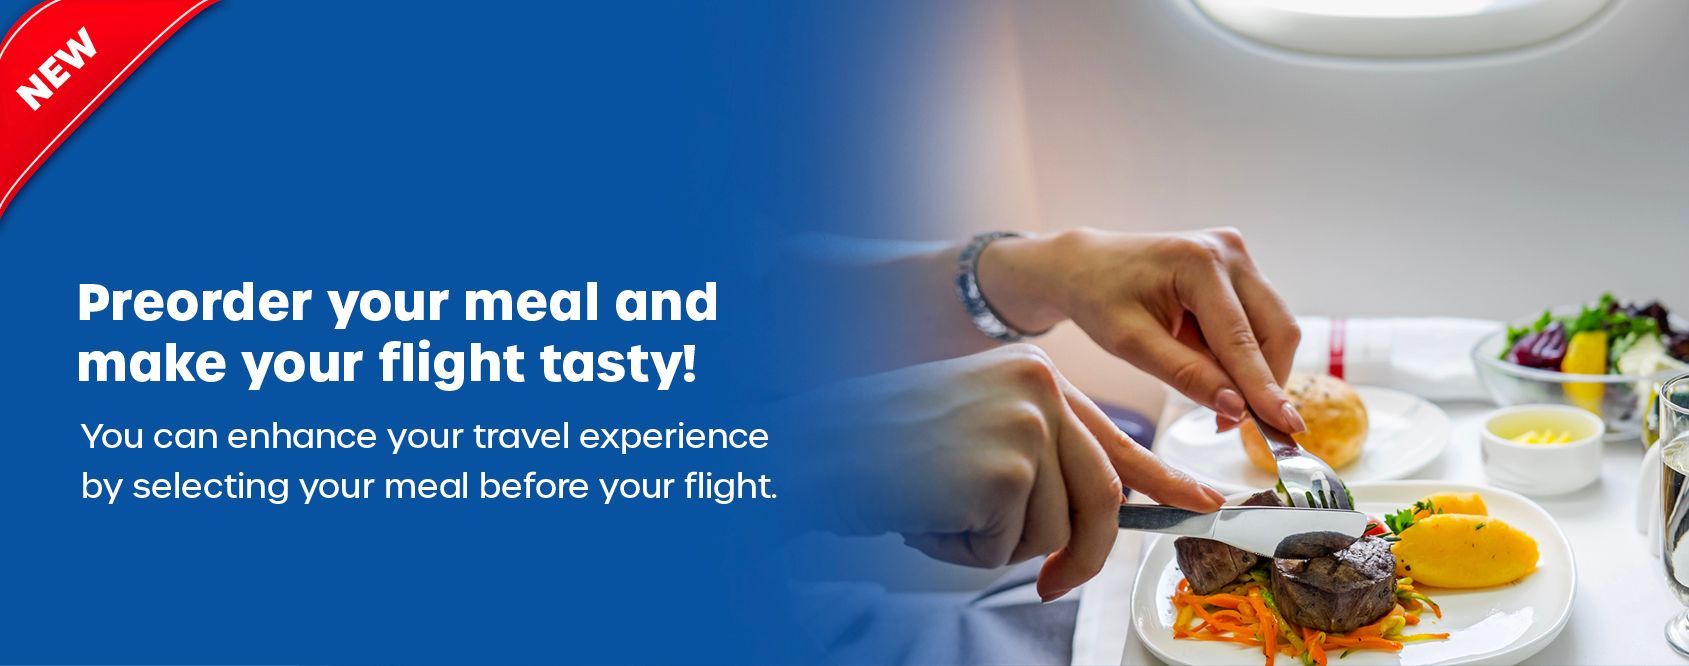 AnadoluJet is one of the many airlines that offer pre-order options to its passengers. https://www.anadolujet.com/en 